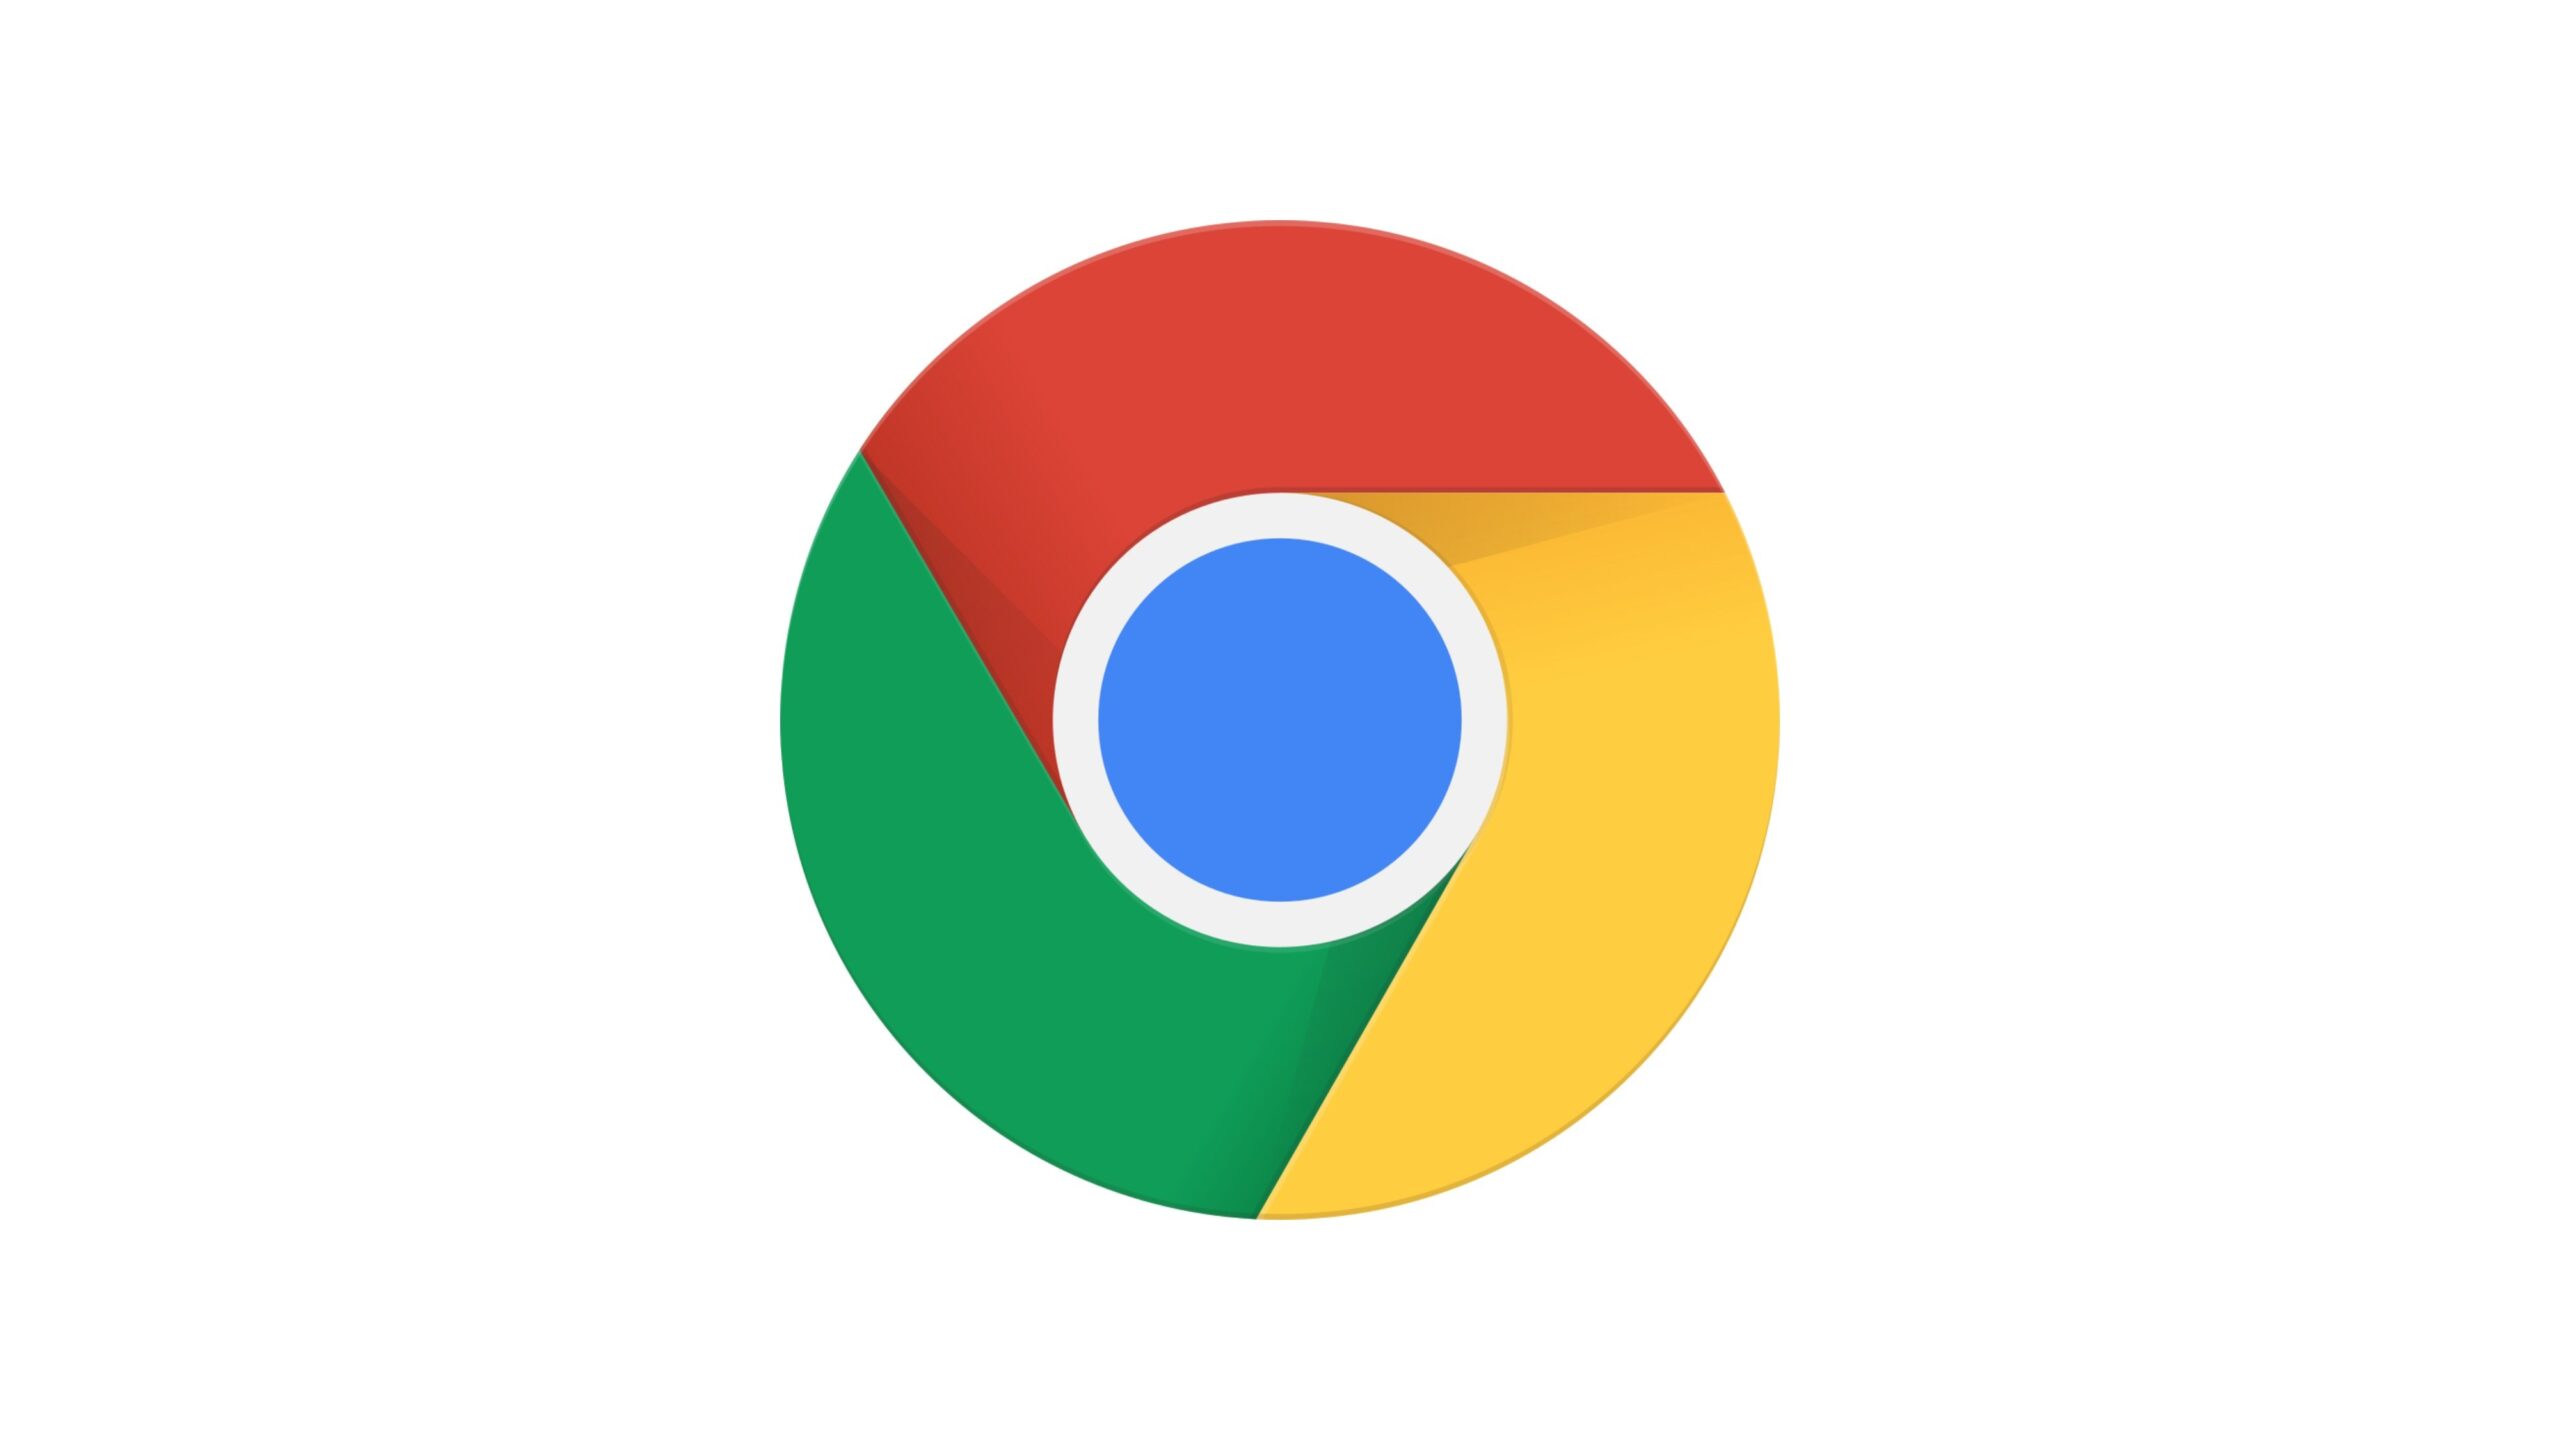 Google Chrome for Android 64-bit requires a minimum of 8GB RAM and Android 10